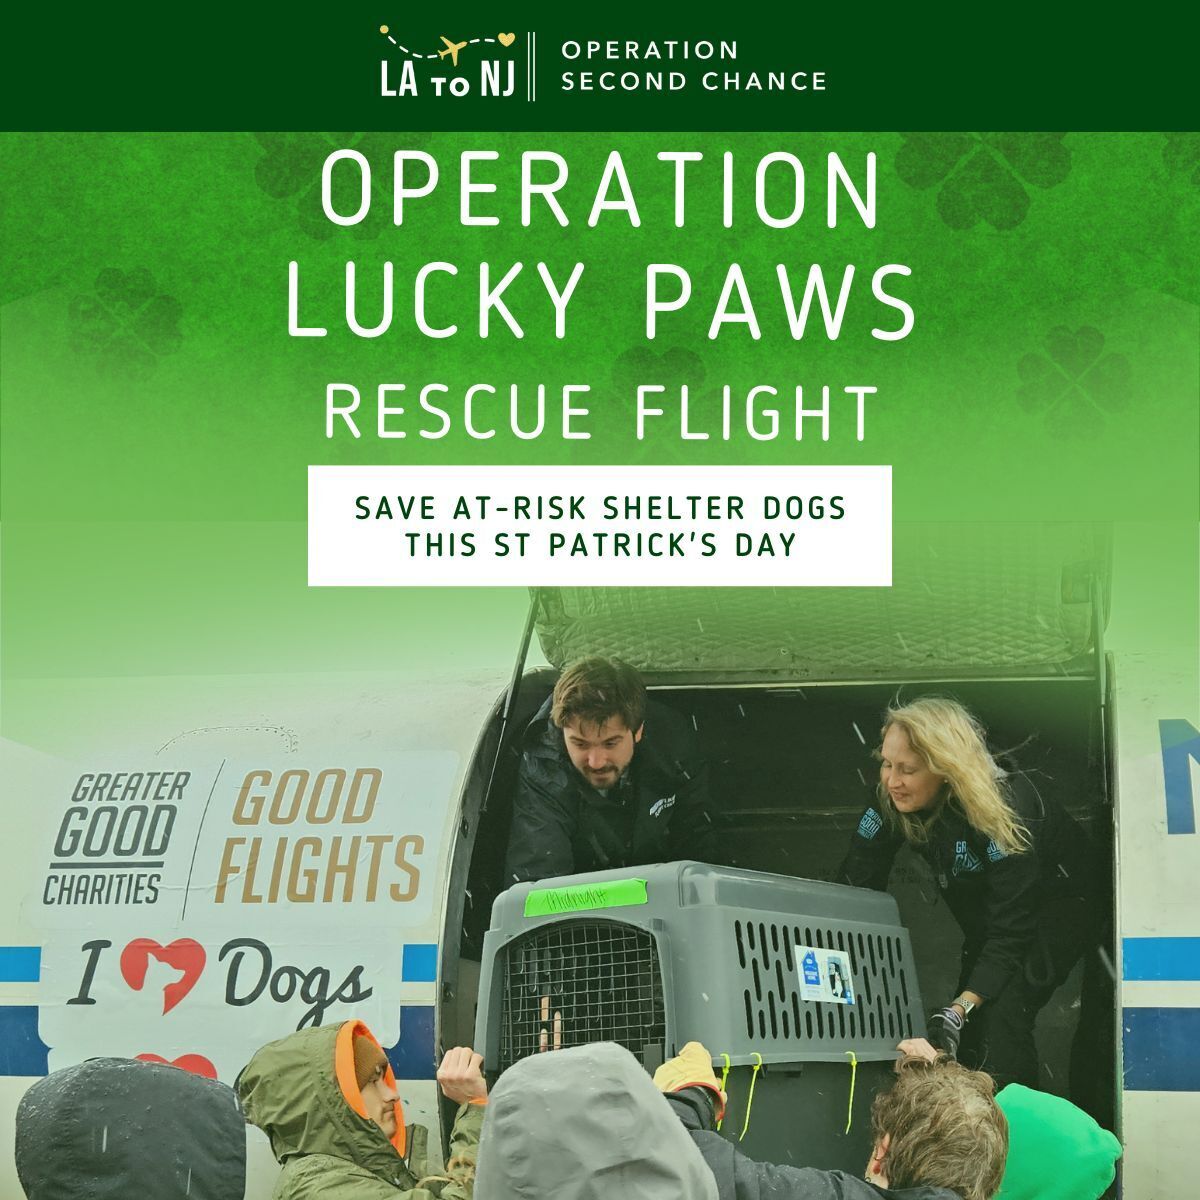 Last Chance: Avert Their Crisis Now! – Donate To Help Save At-Risk Shelter Dogs This St. Patrick's Day